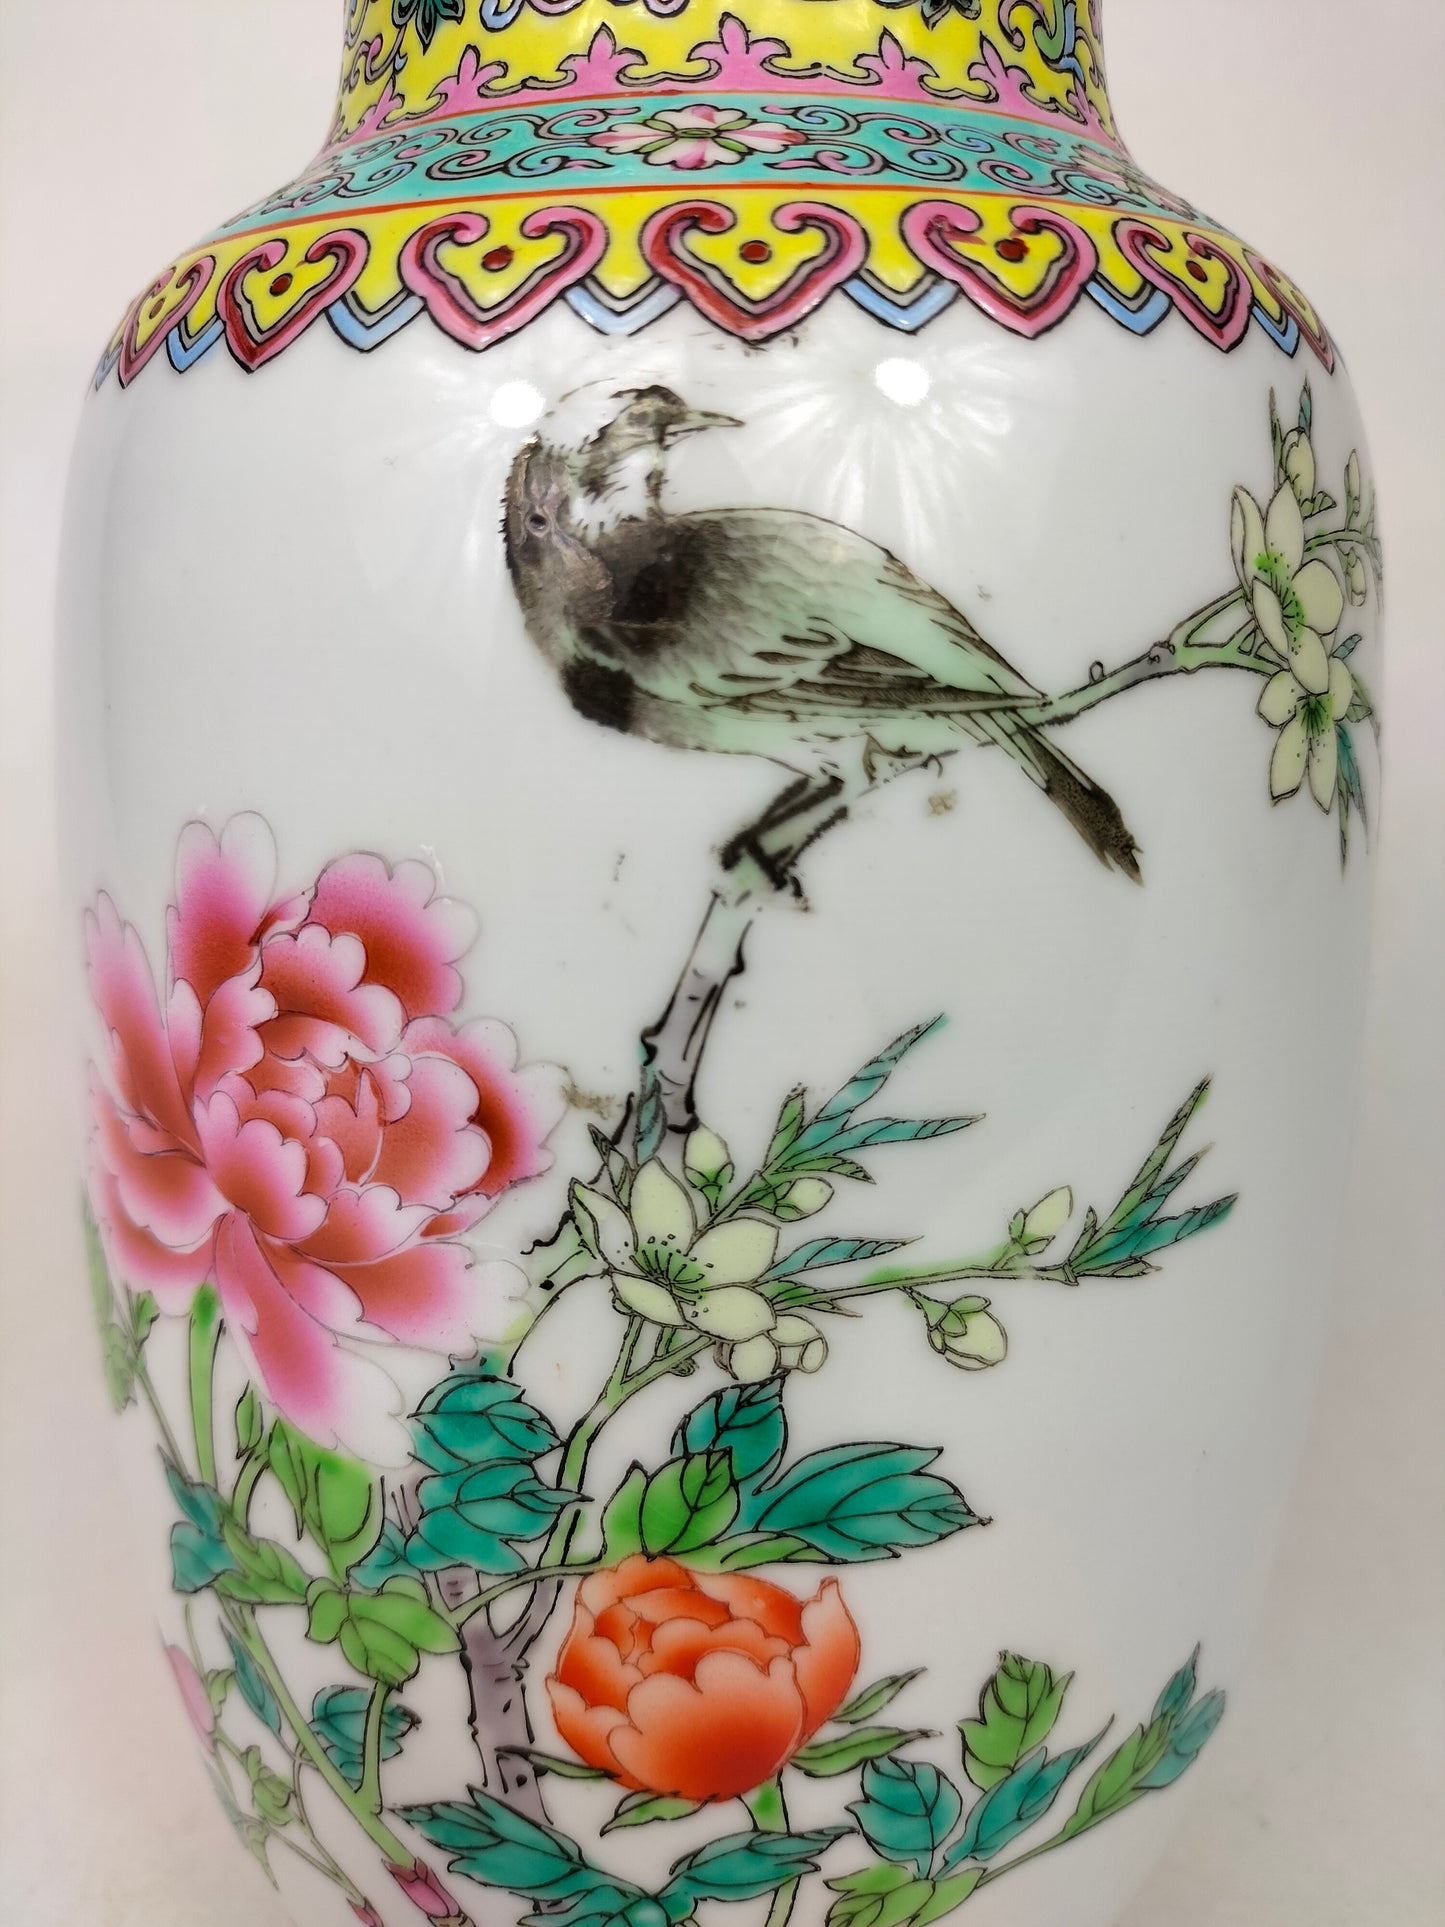 Chinese famille rose vase decorated with flowers and a bird // Jingdezhen - Qianlong mark - 20th century